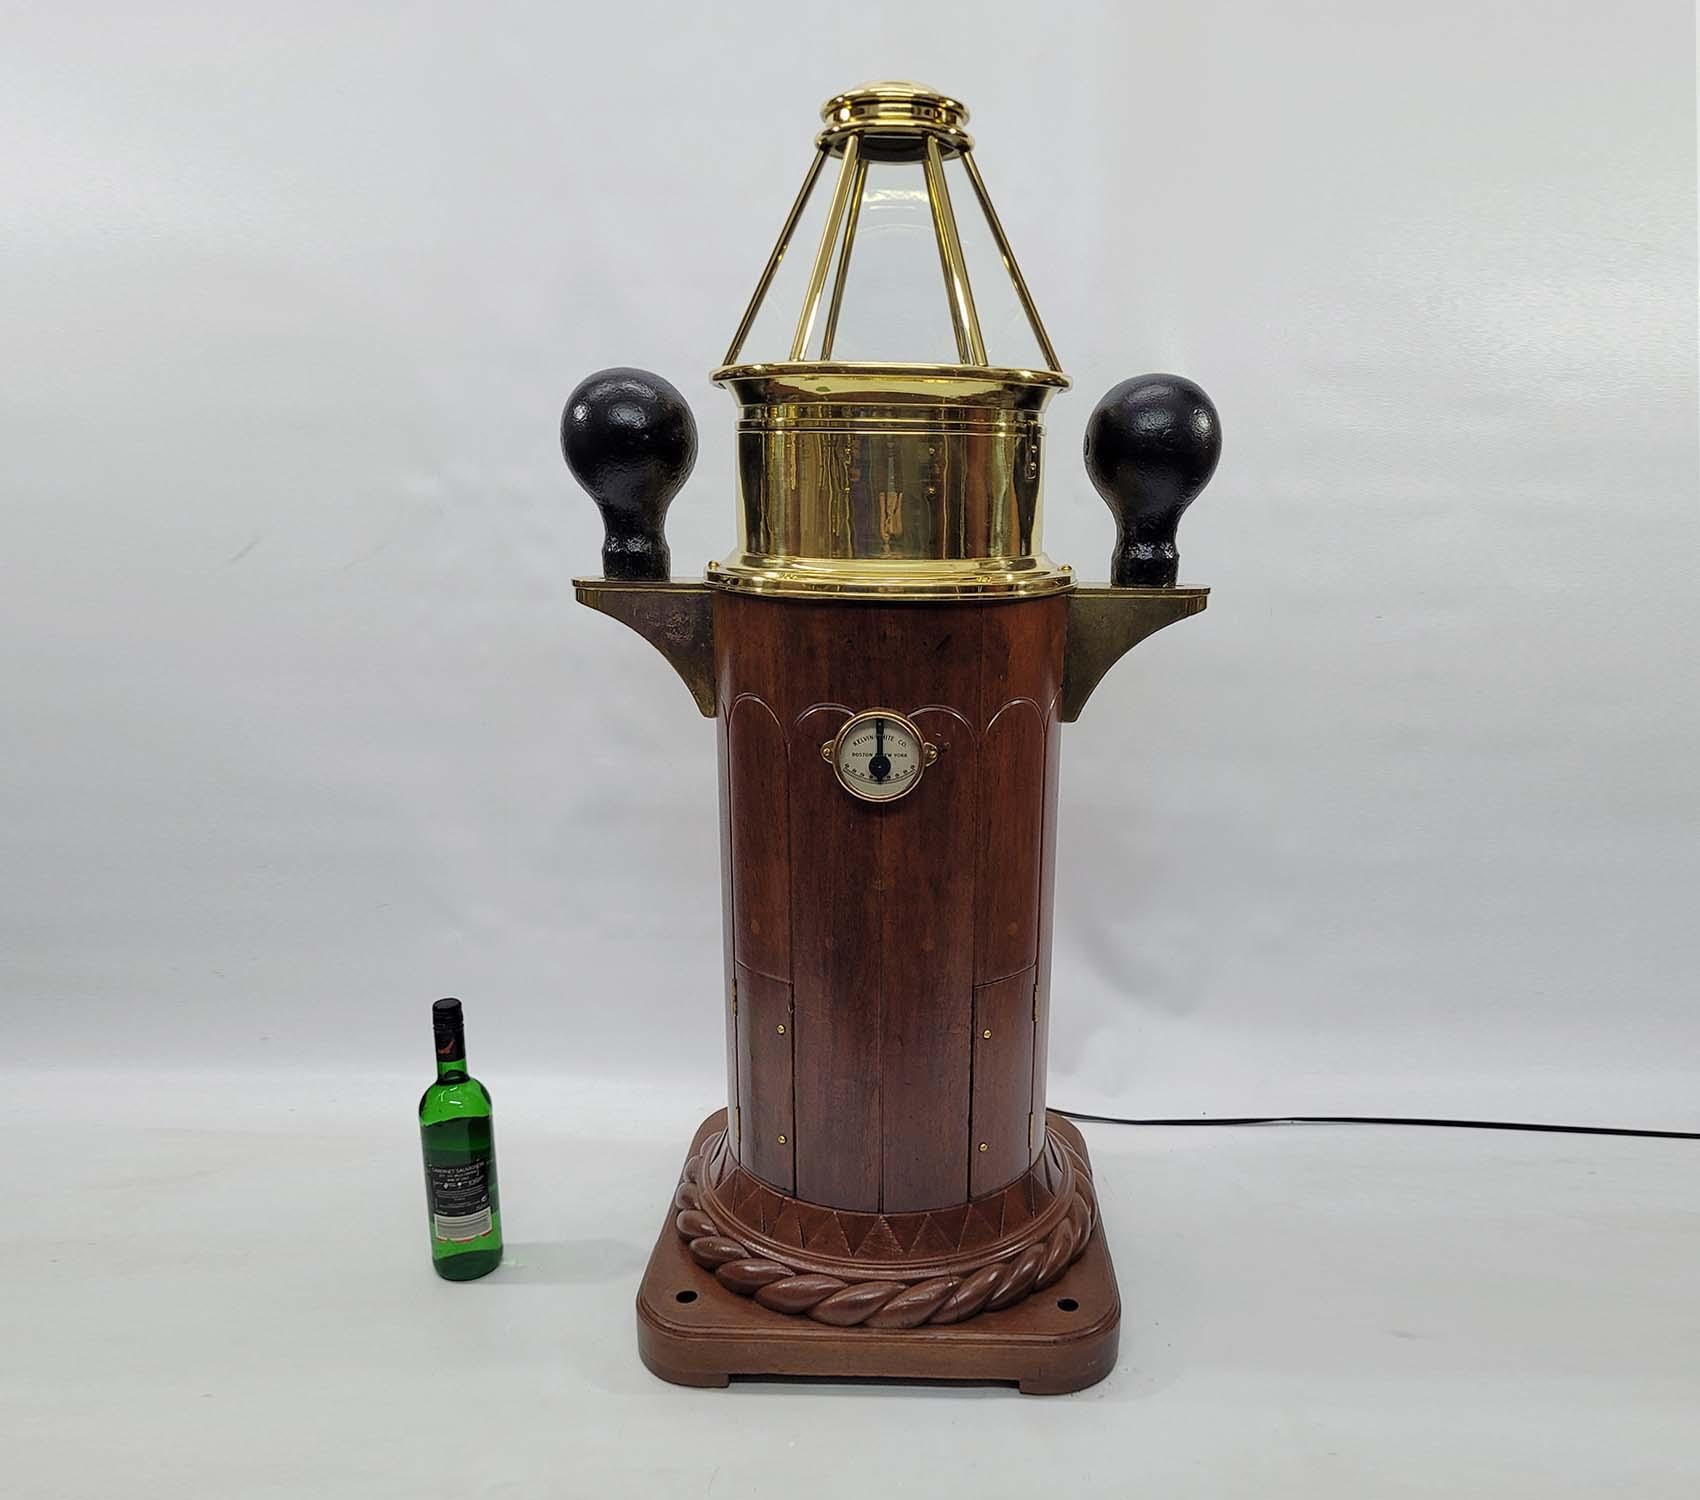 Fine early 20th Century Skylight Yacht Binnacle. Amazing wood base with intricate rope carving and varnish and varnish finish. The six-sided Skylight top houses. A gimballed Compass. Iron compensating balls are mounted to brackets. 

Weight: 110